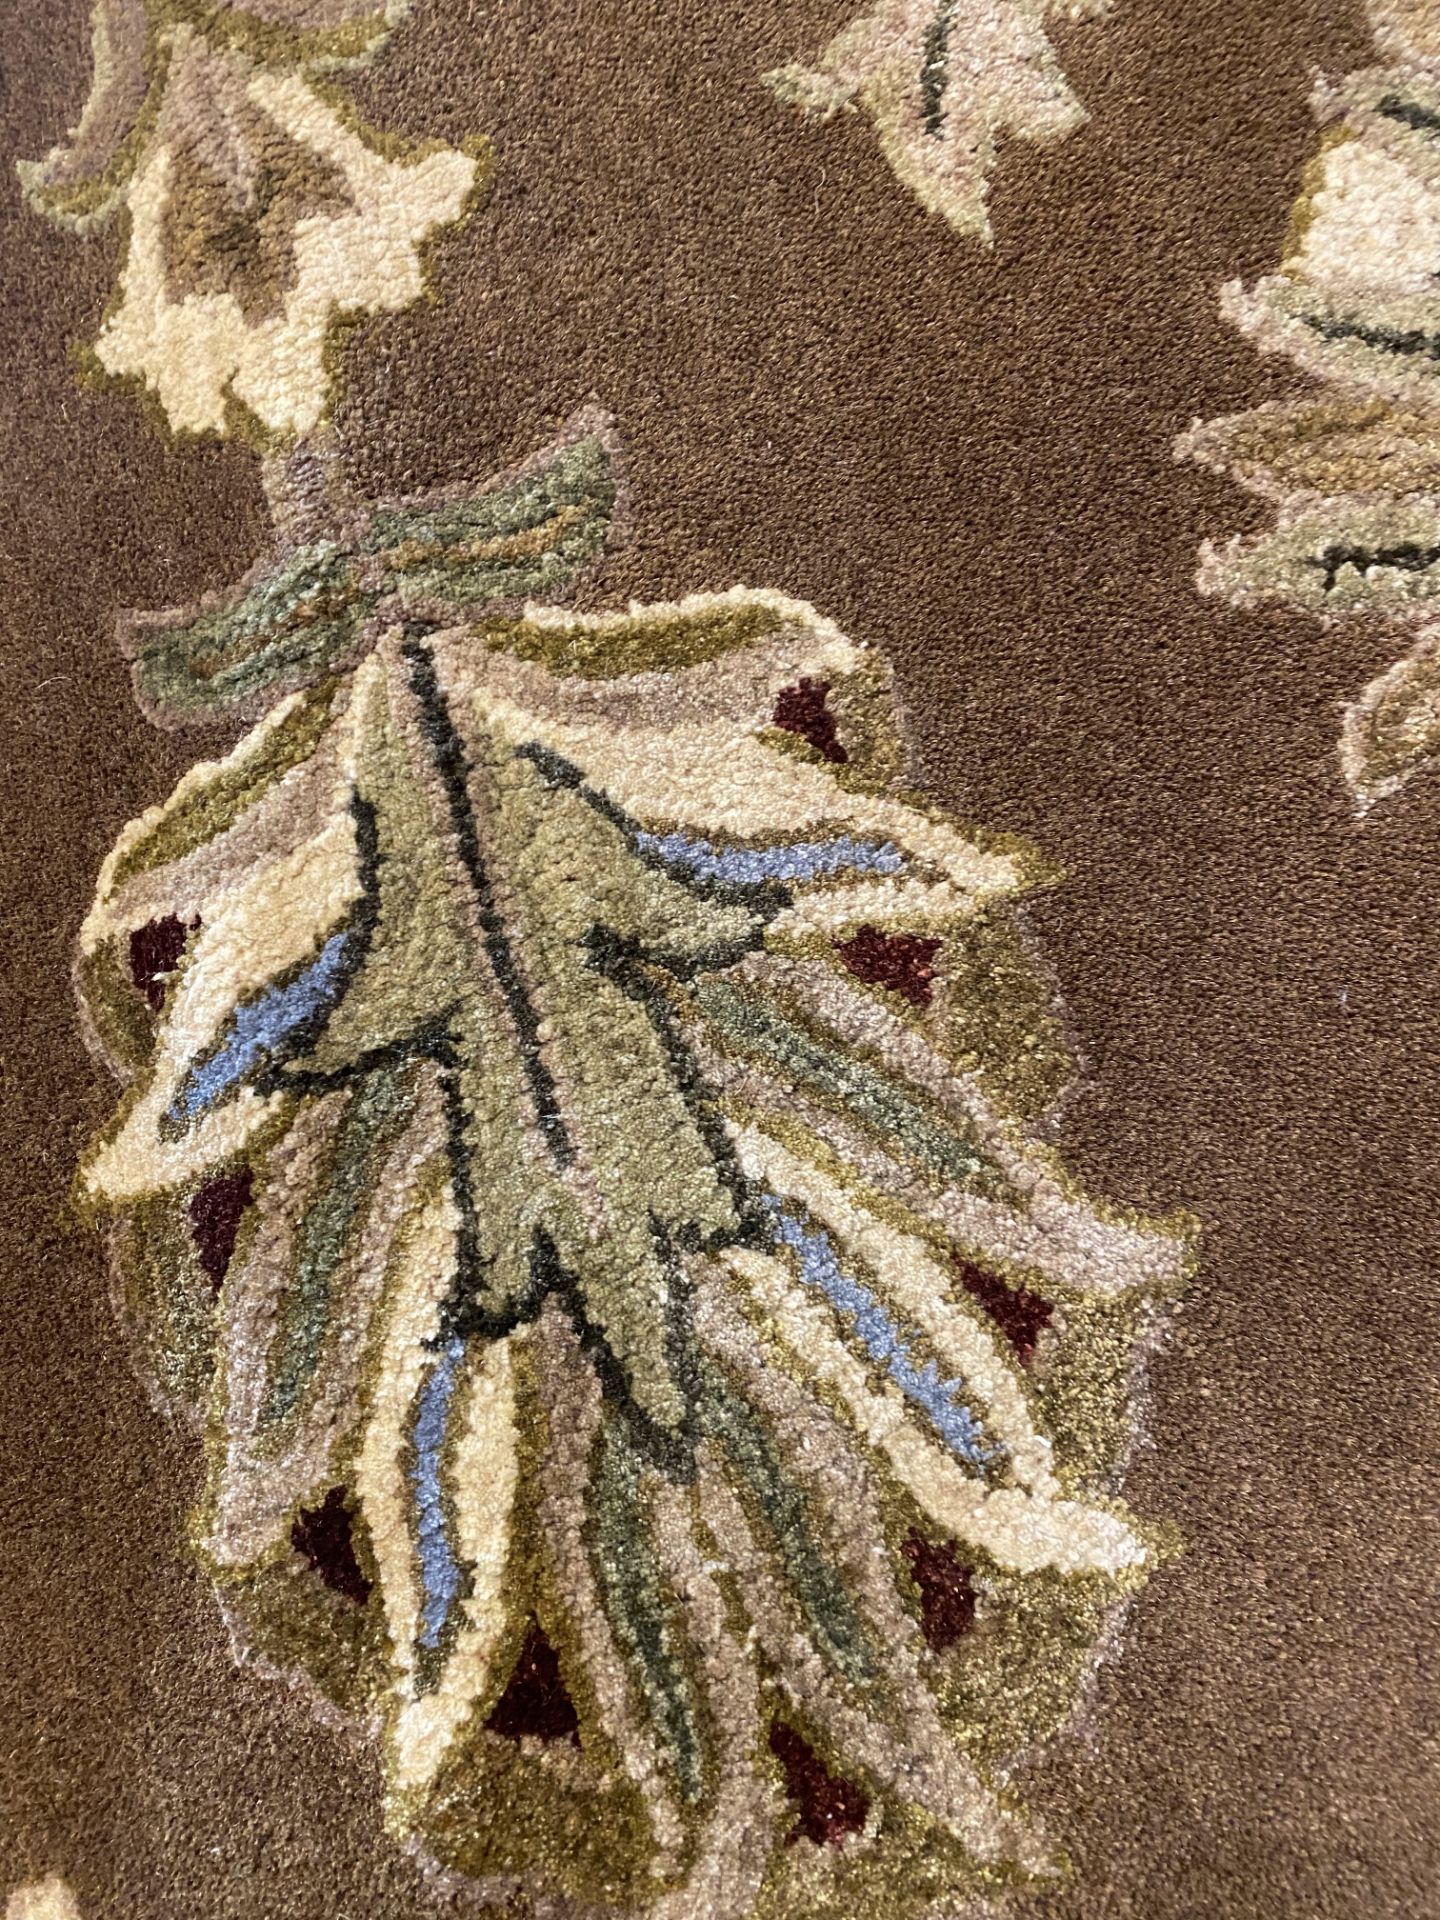 8' ROUND WOOL/A.SILK HAND MADE IN INDIA, MSRP $1,995, INVENTORY CODE PROVENCE IAD8308 BN/BG - Image 3 of 6